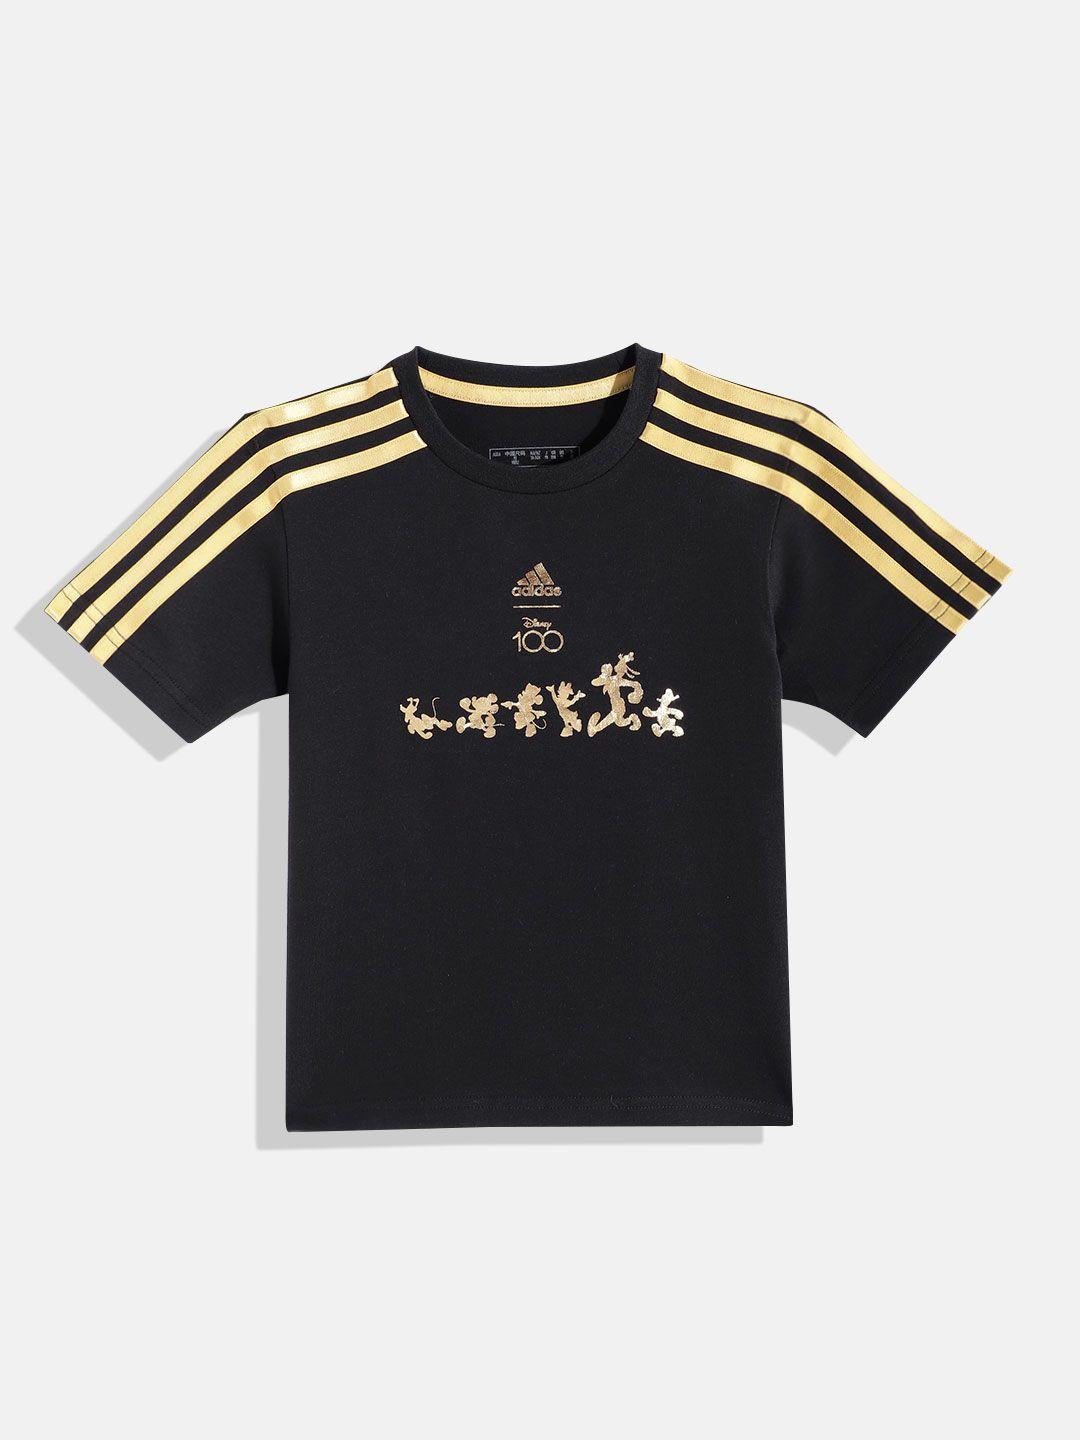 adidas kids disney printed loose fit lk dy 100 t-shirt with striped detail